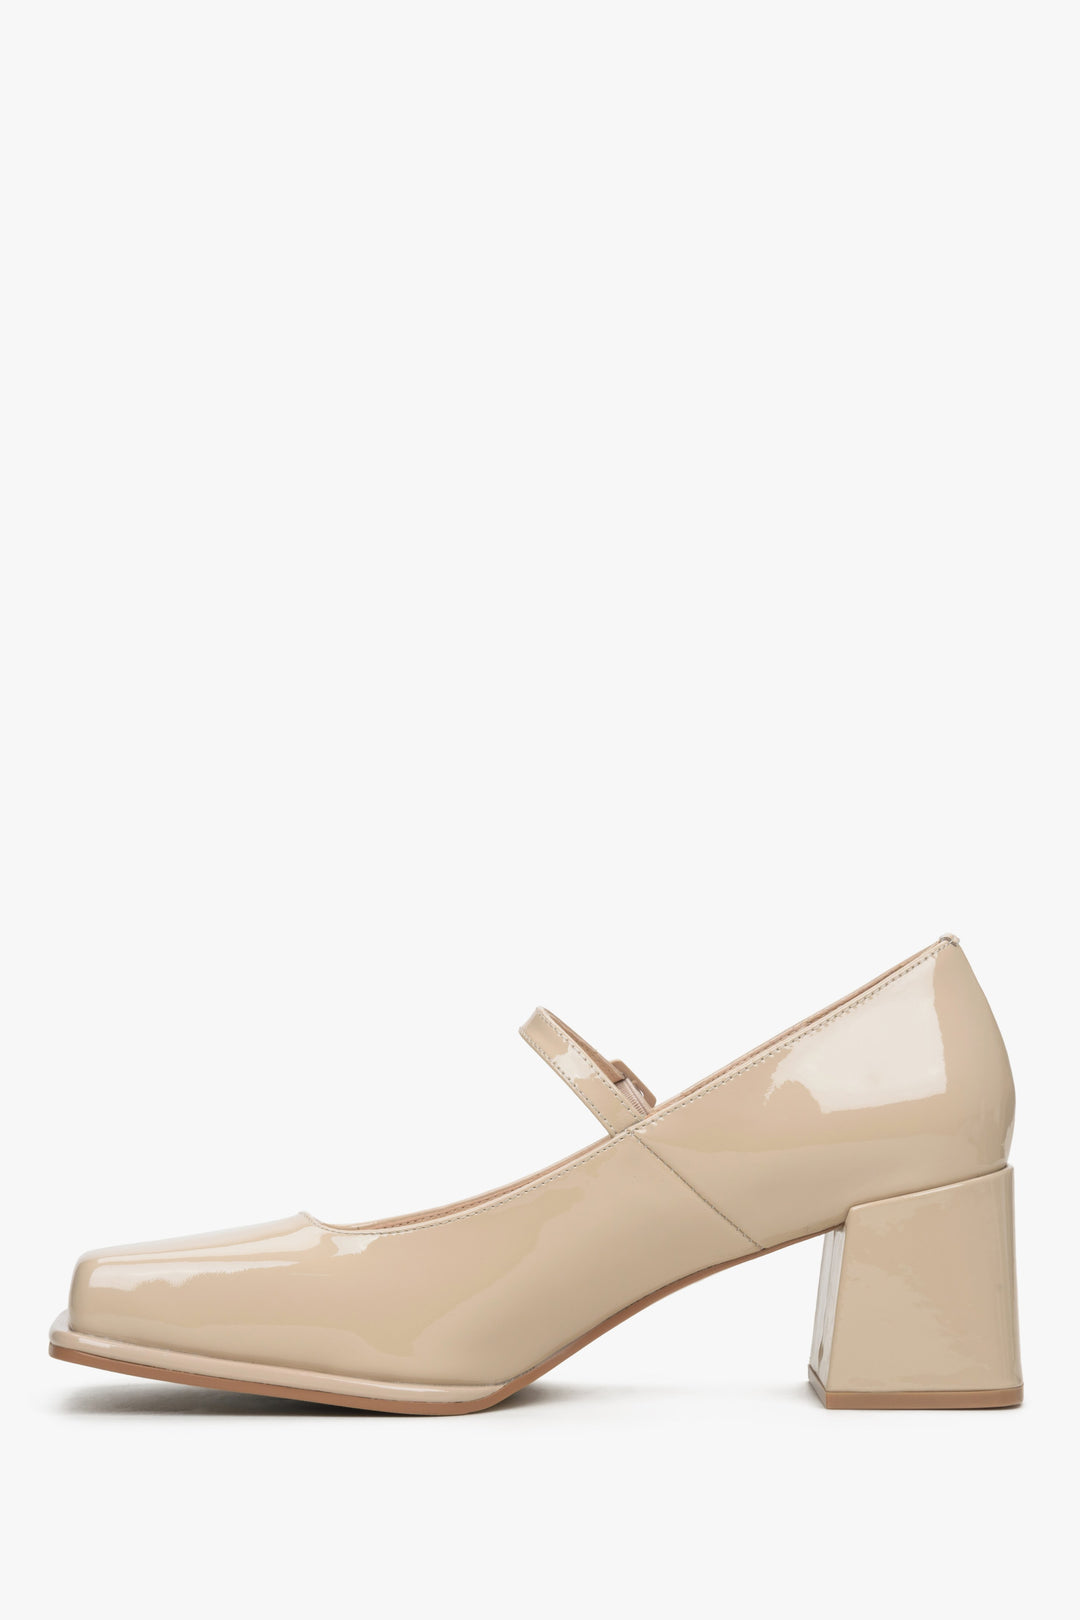 Women's beige pumps made of patent genuine leather.